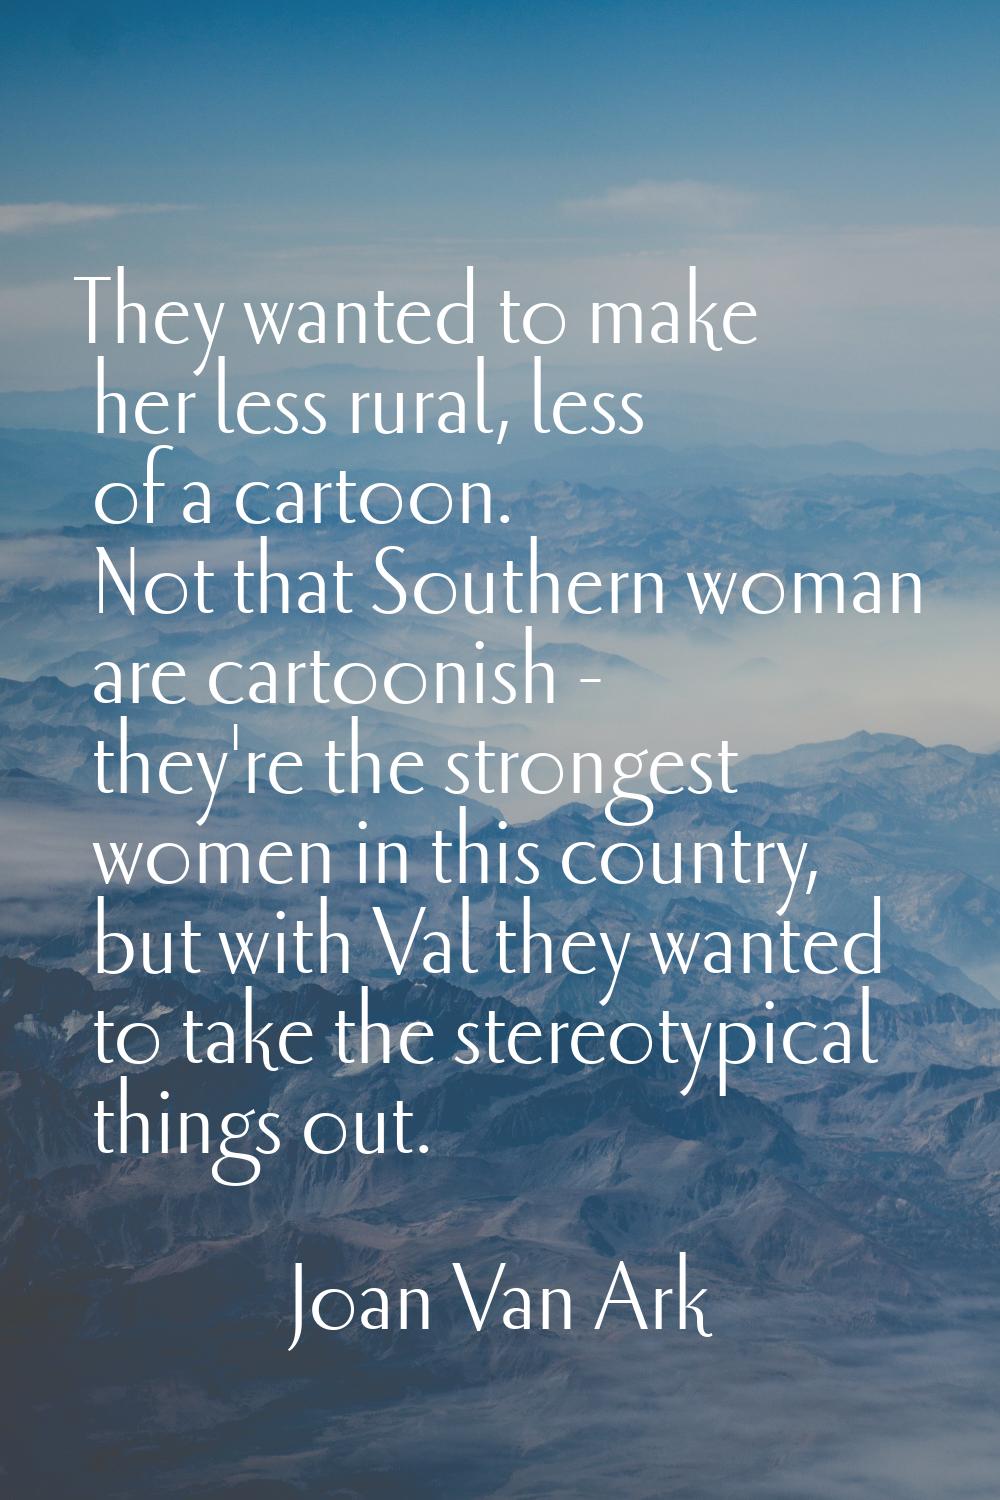 They wanted to make her less rural, less of a cartoon. Not that Southern woman are cartoonish - the